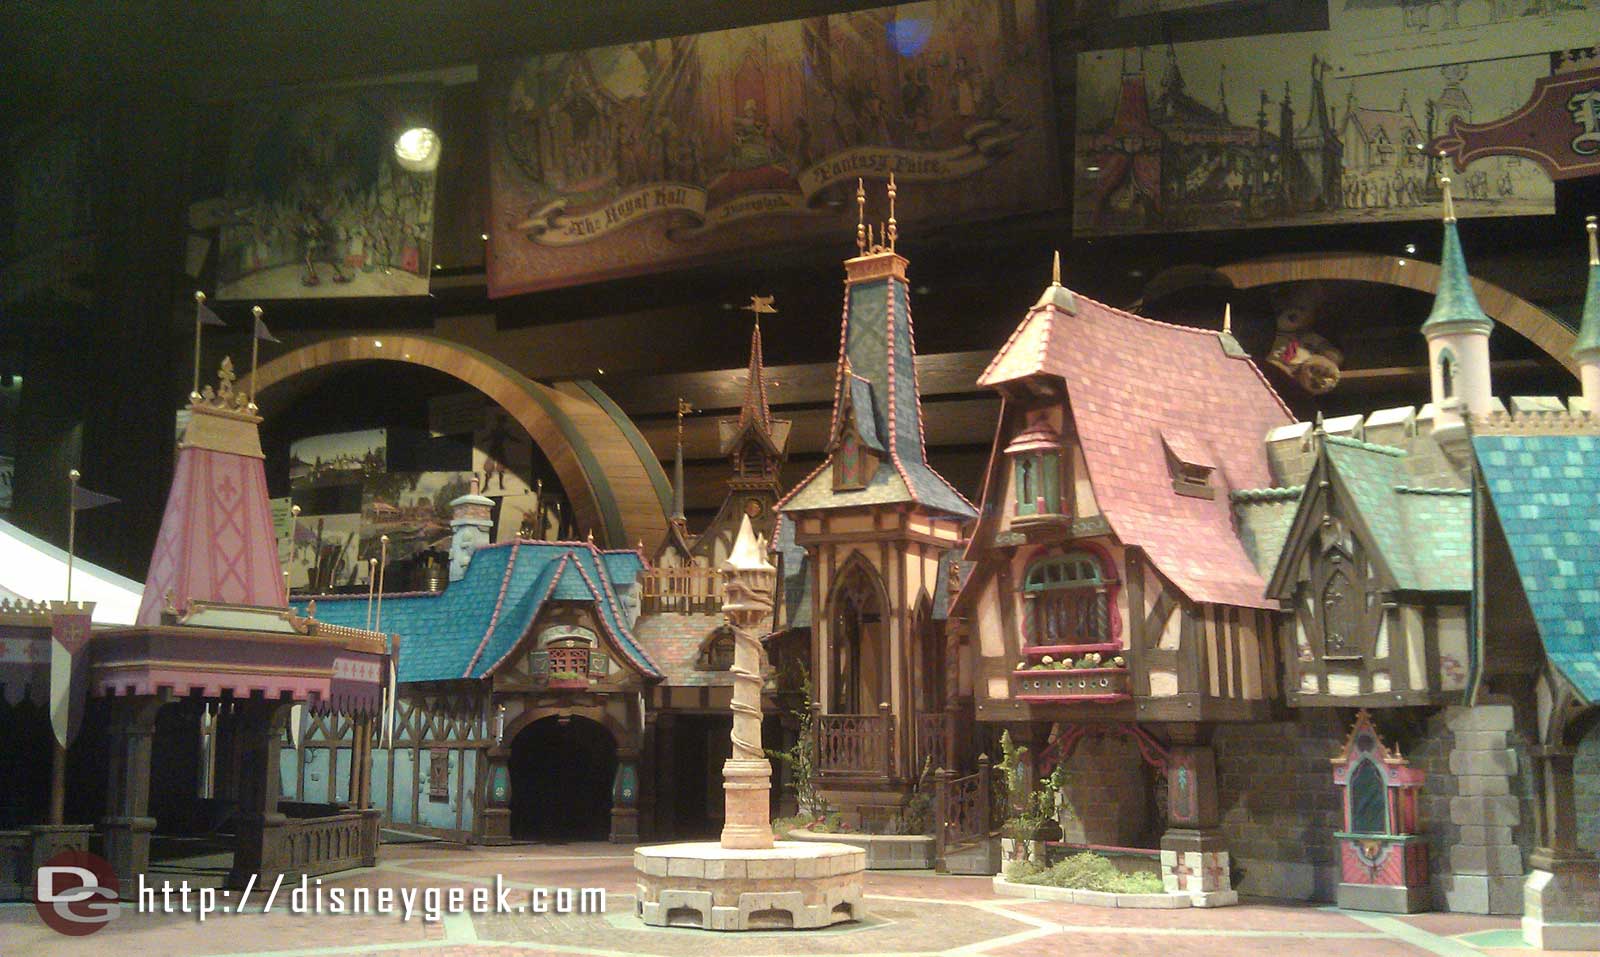 Another view of the Fanrasy Faire model in the Blue Sky Cellar